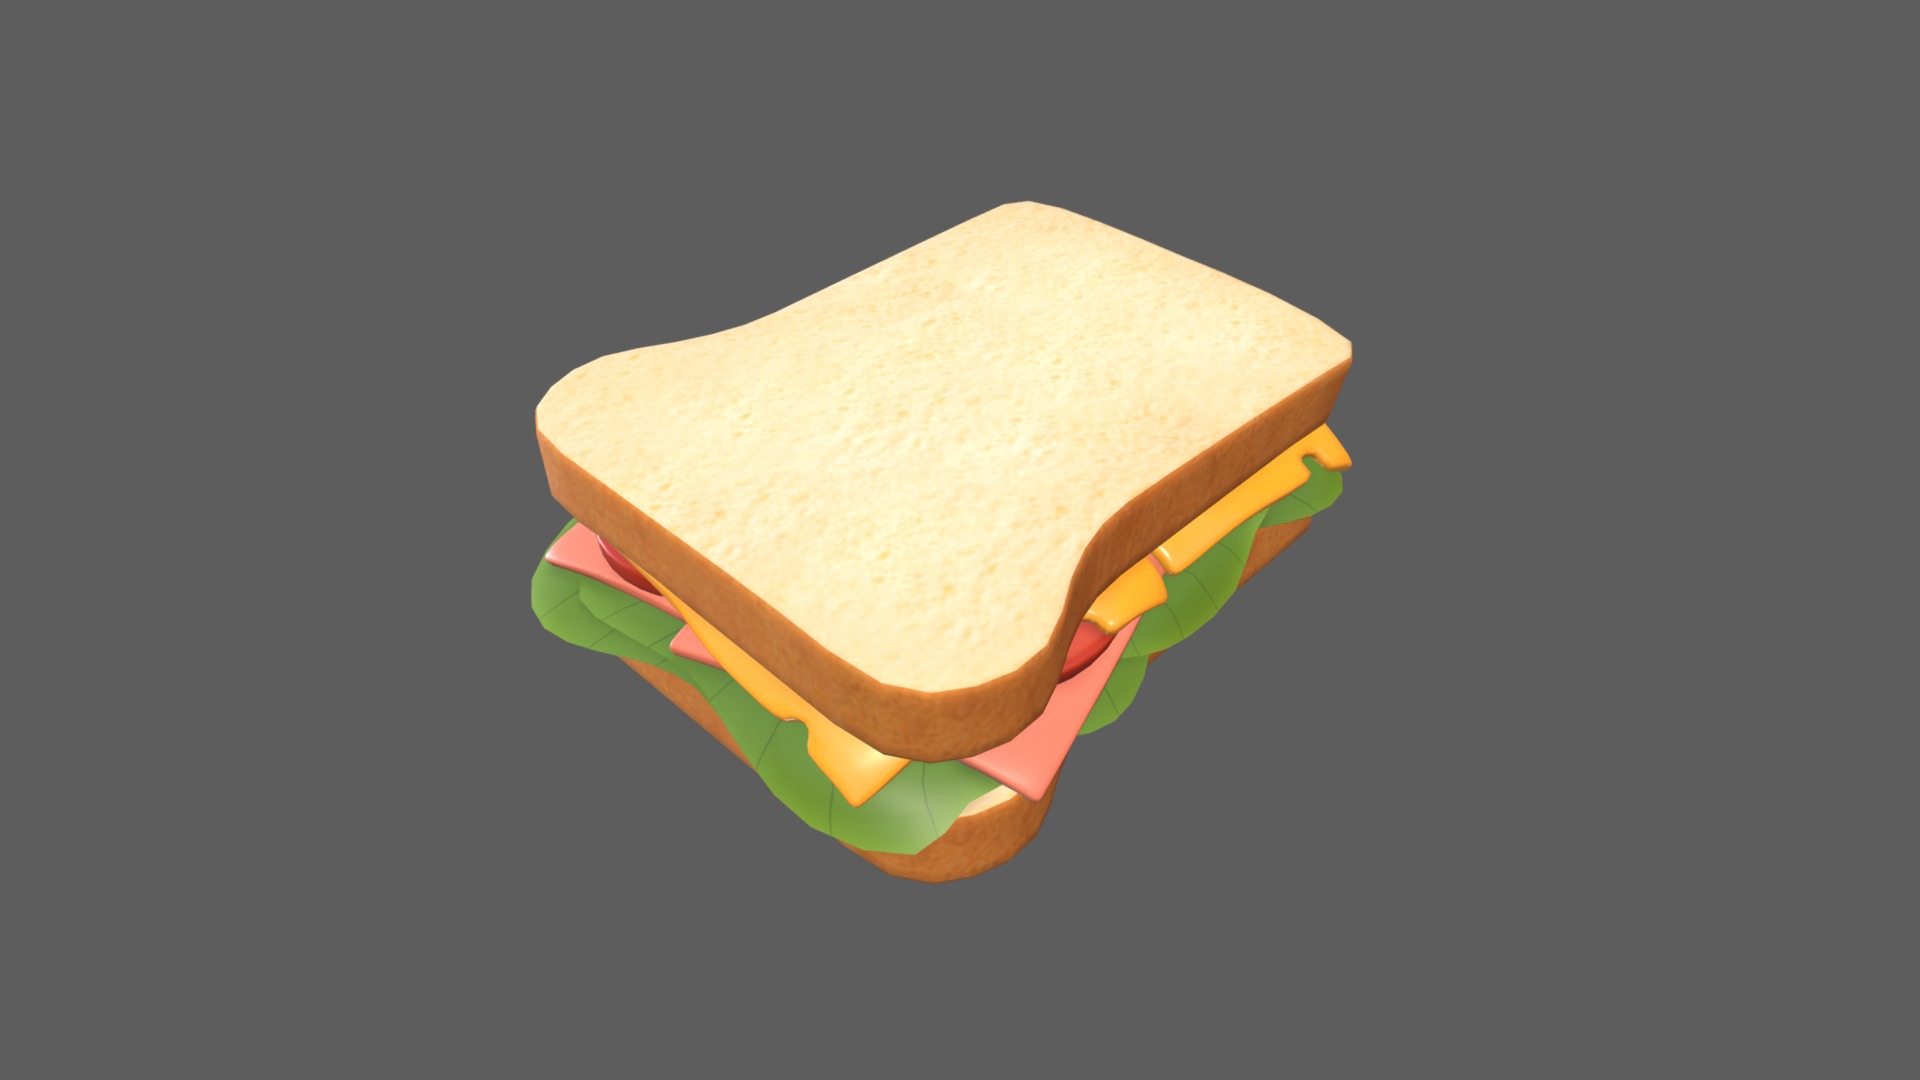 3D model Sanwich - This is a 3D model of the Sanwich. The 3D model is about a cheeseburger with a green and white design.